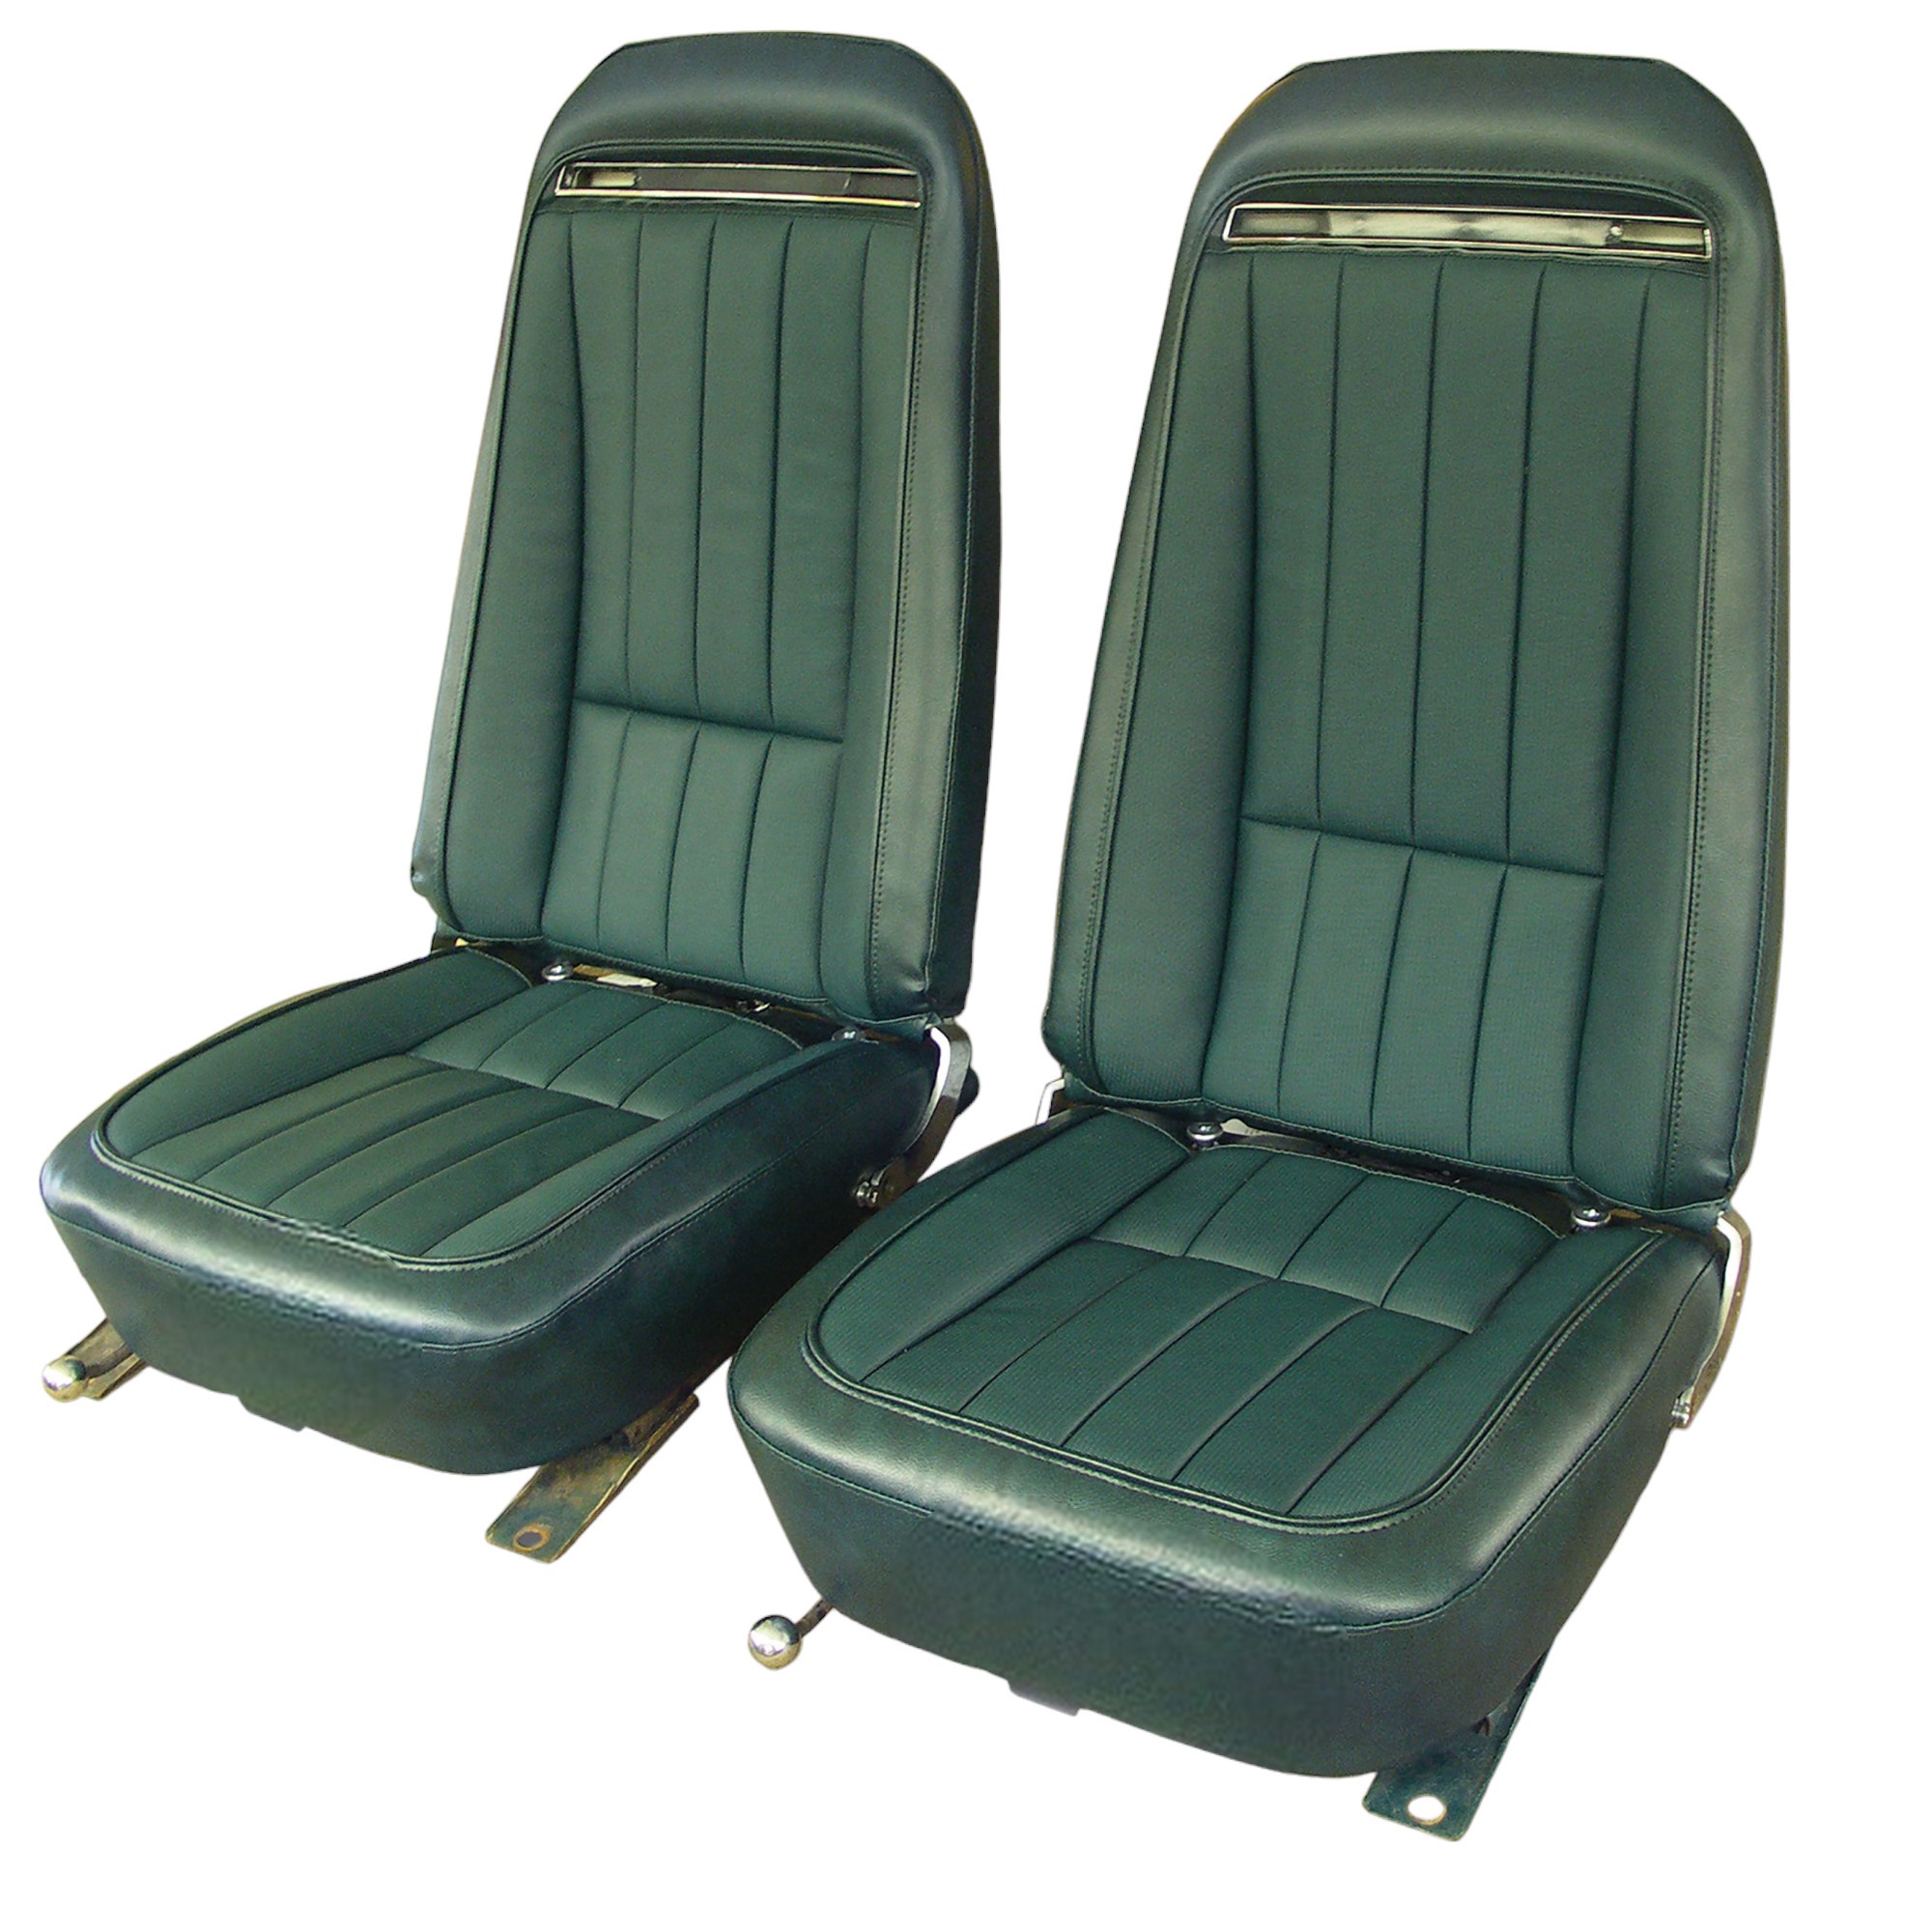 1971 C3 Corvette Mounted Seats Green "Leather-Like" Vinyl Without Shoulder Harness